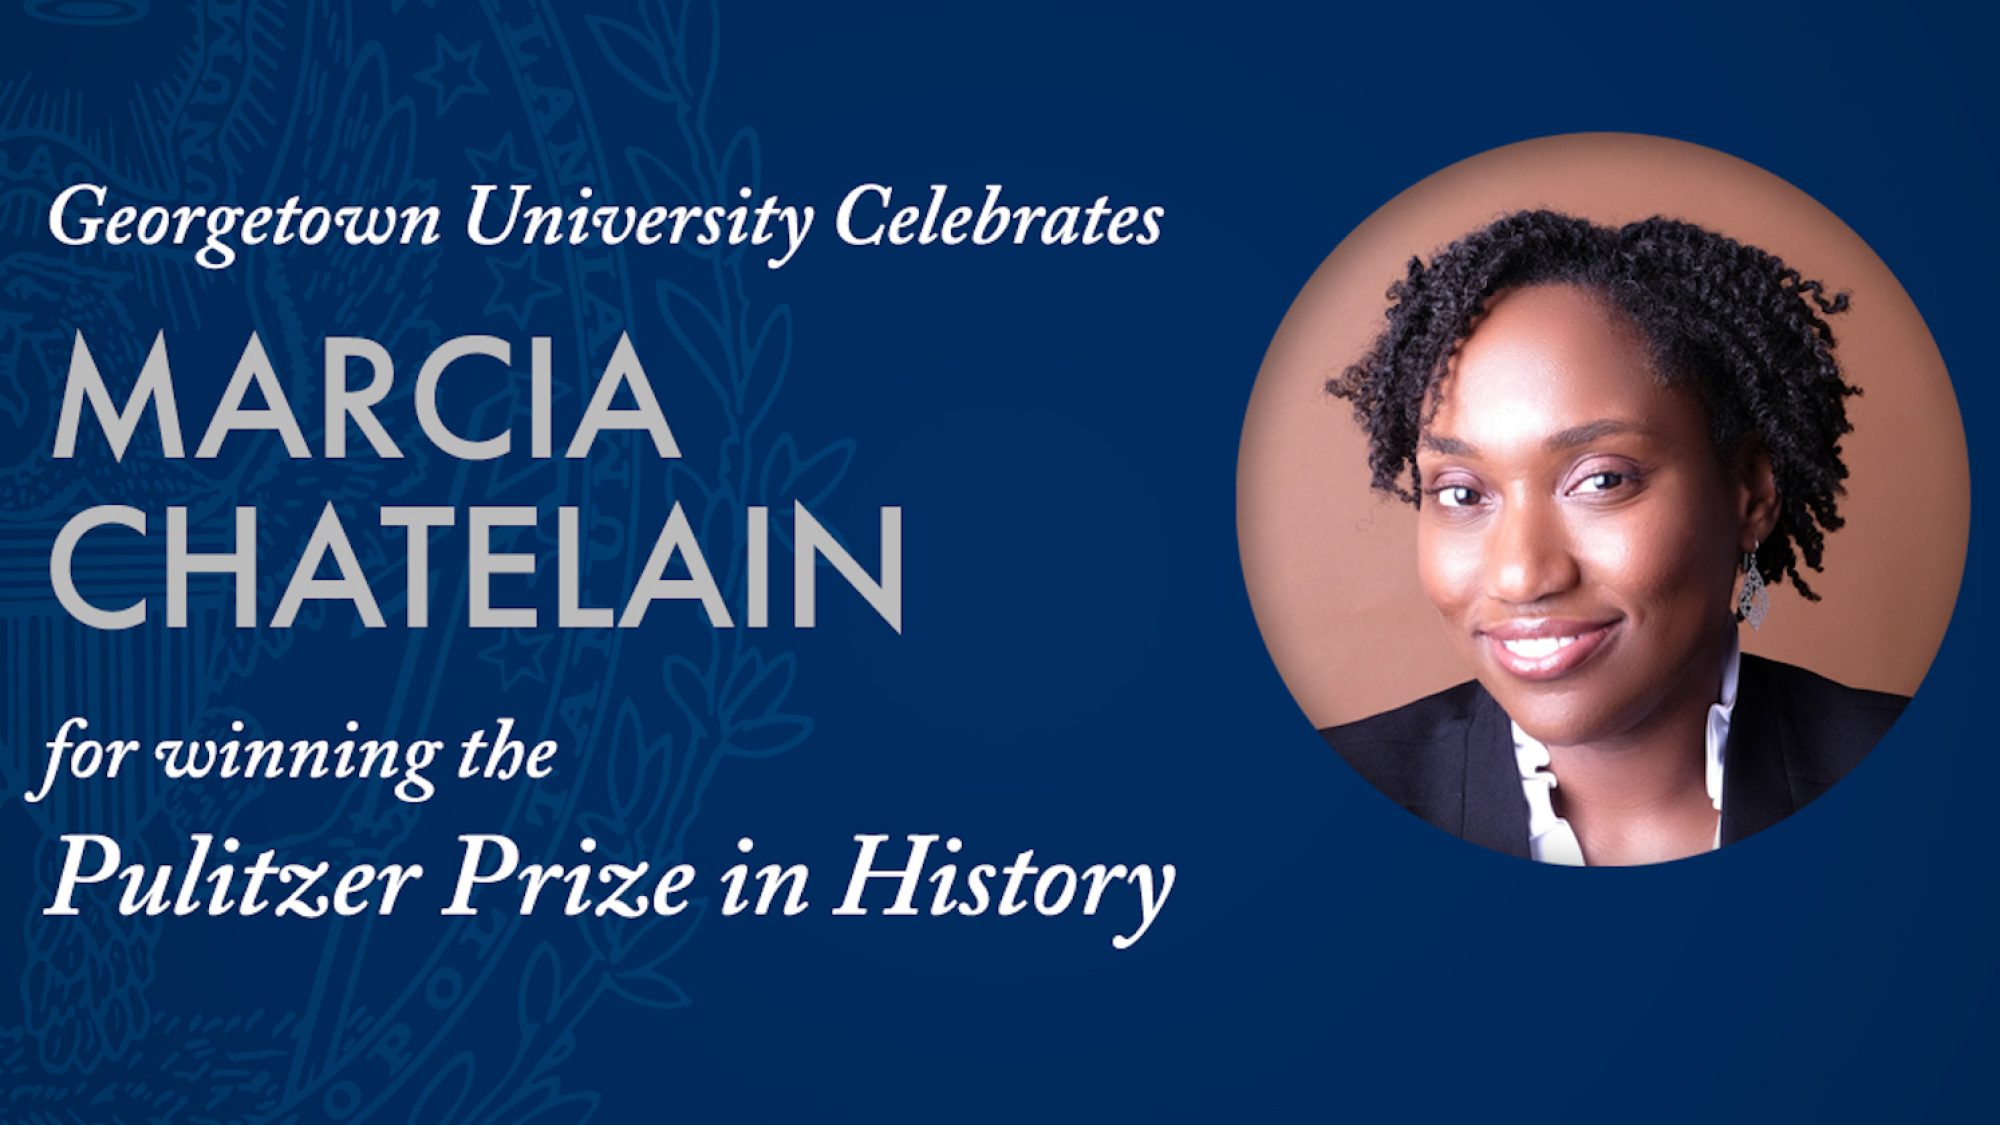 Graphic with a headshot of Marcia Chatelain and the text &quot;Georgetown University Celebrates Marcia Chatelain for winning the Pulitzer Prize in history&quot;